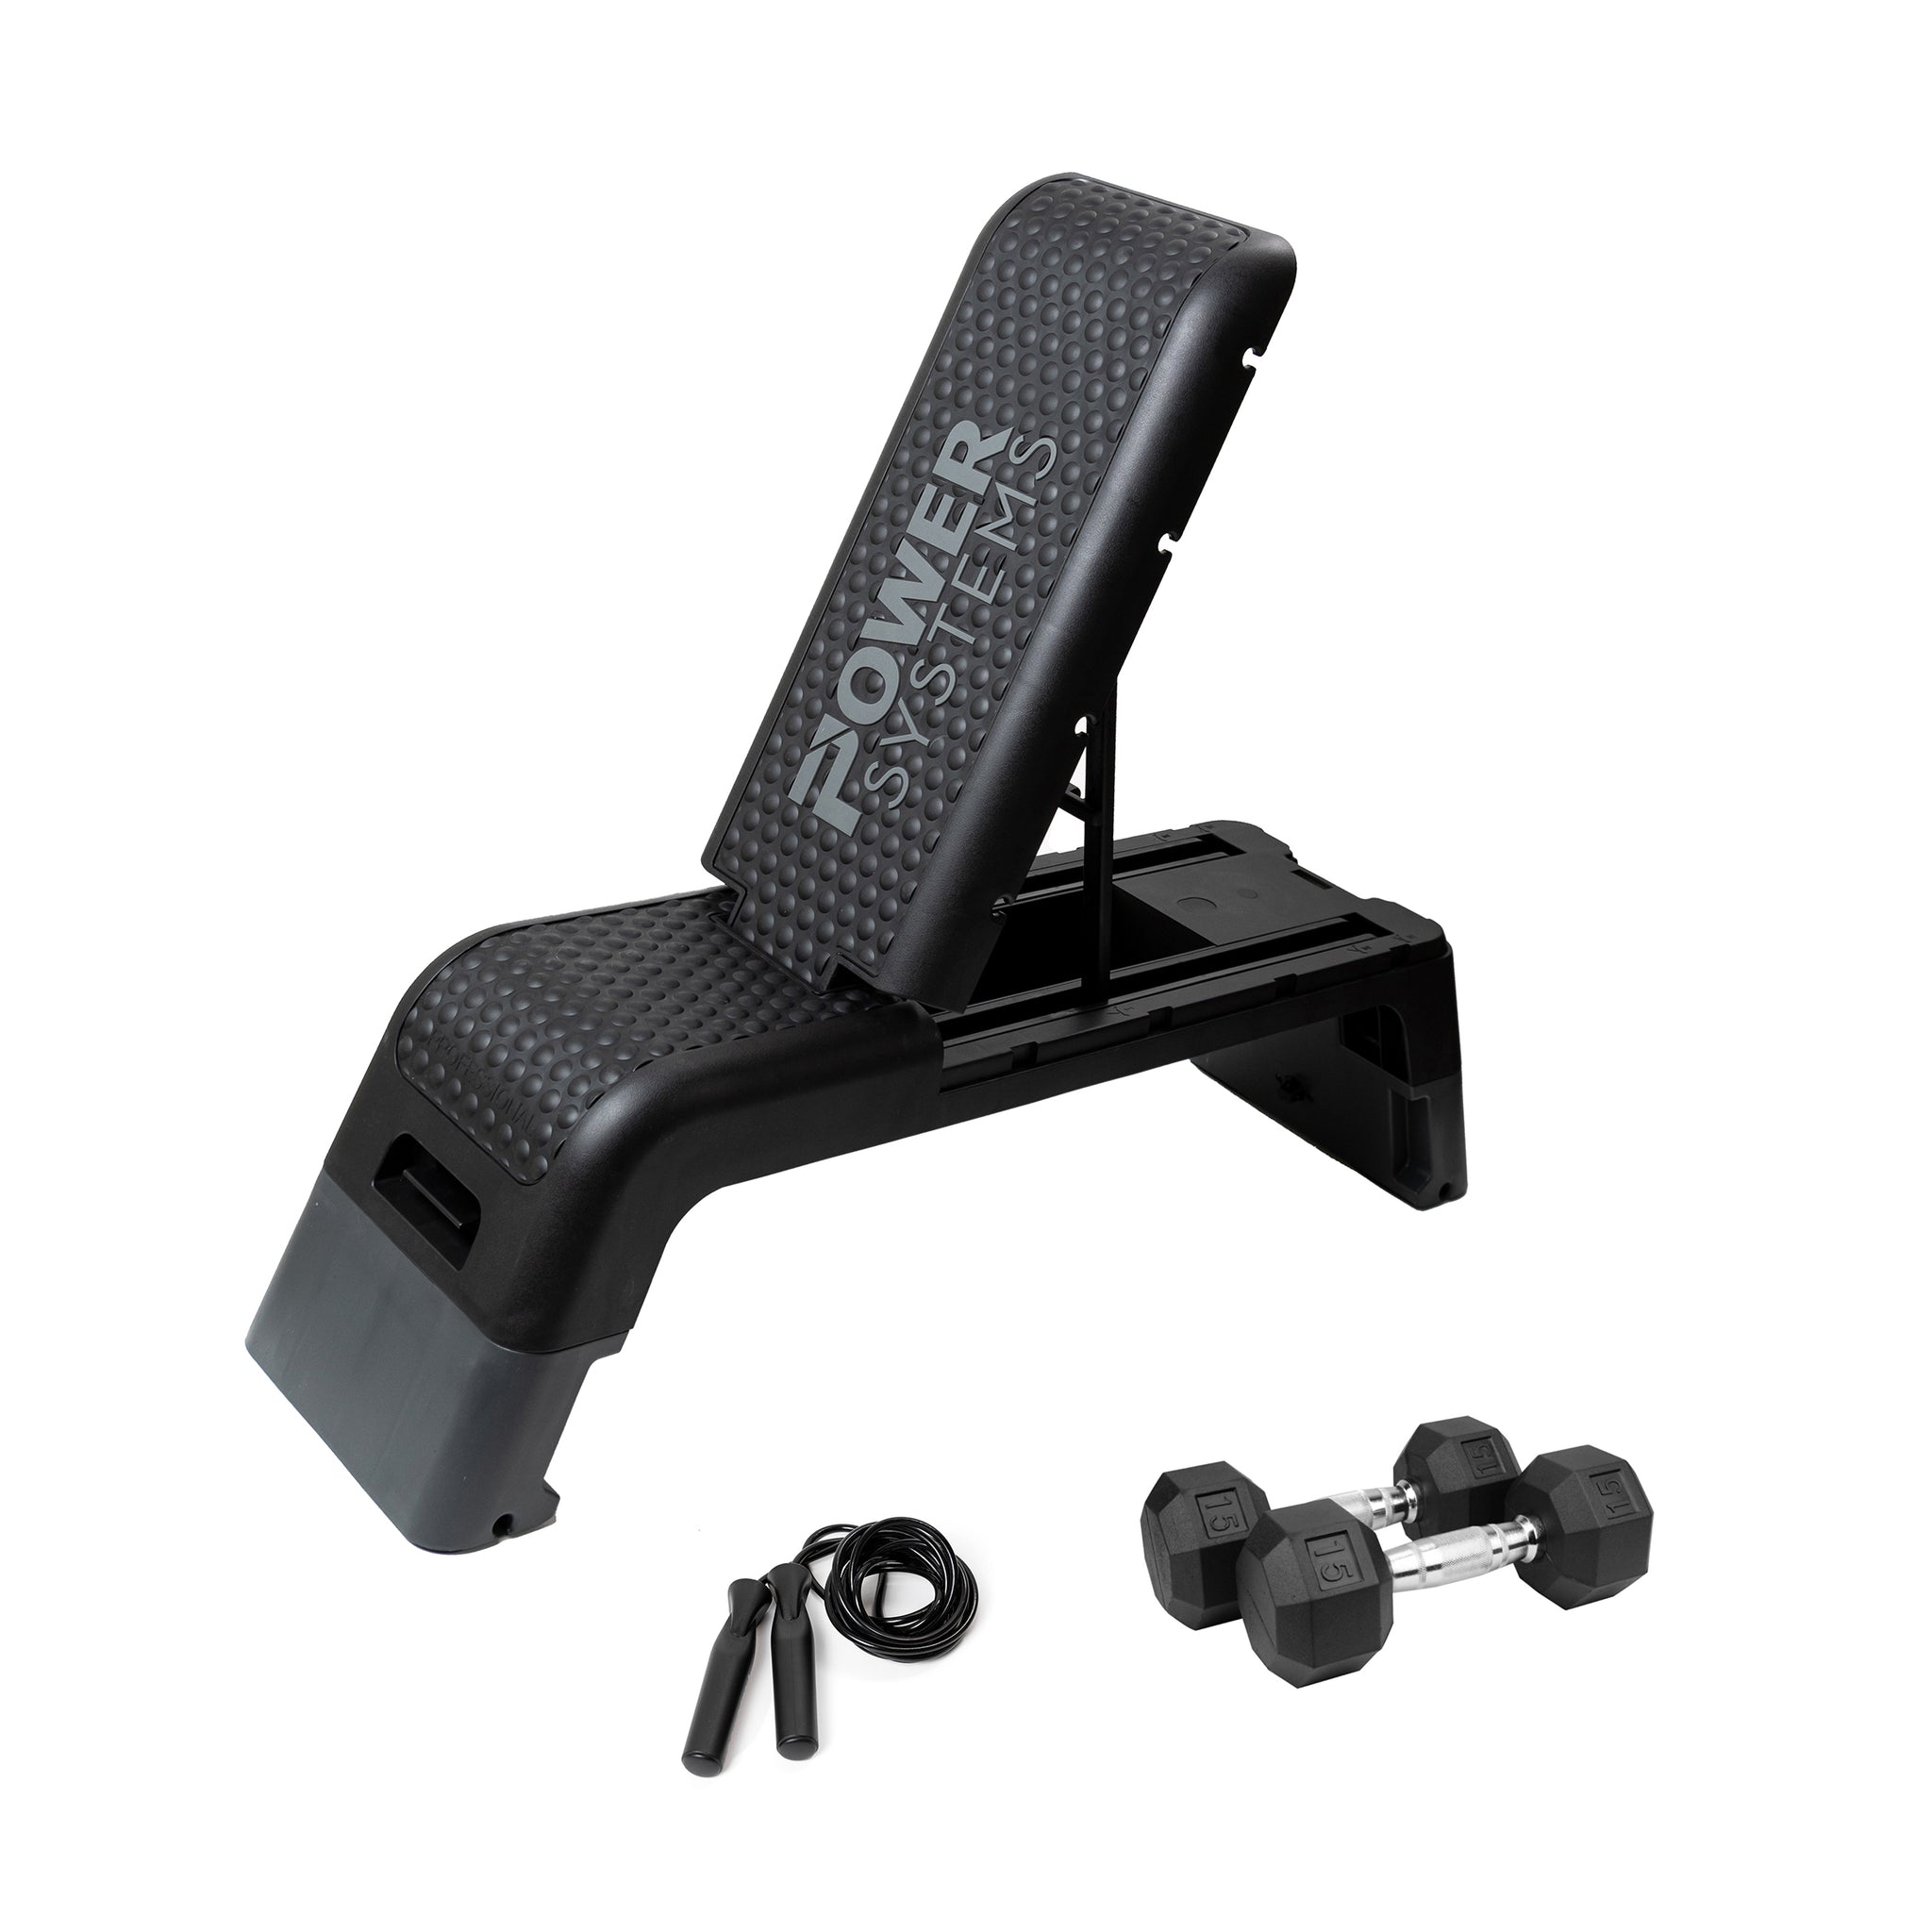 Workout bench, black vinyl jump rope, and a set of dumbbells.